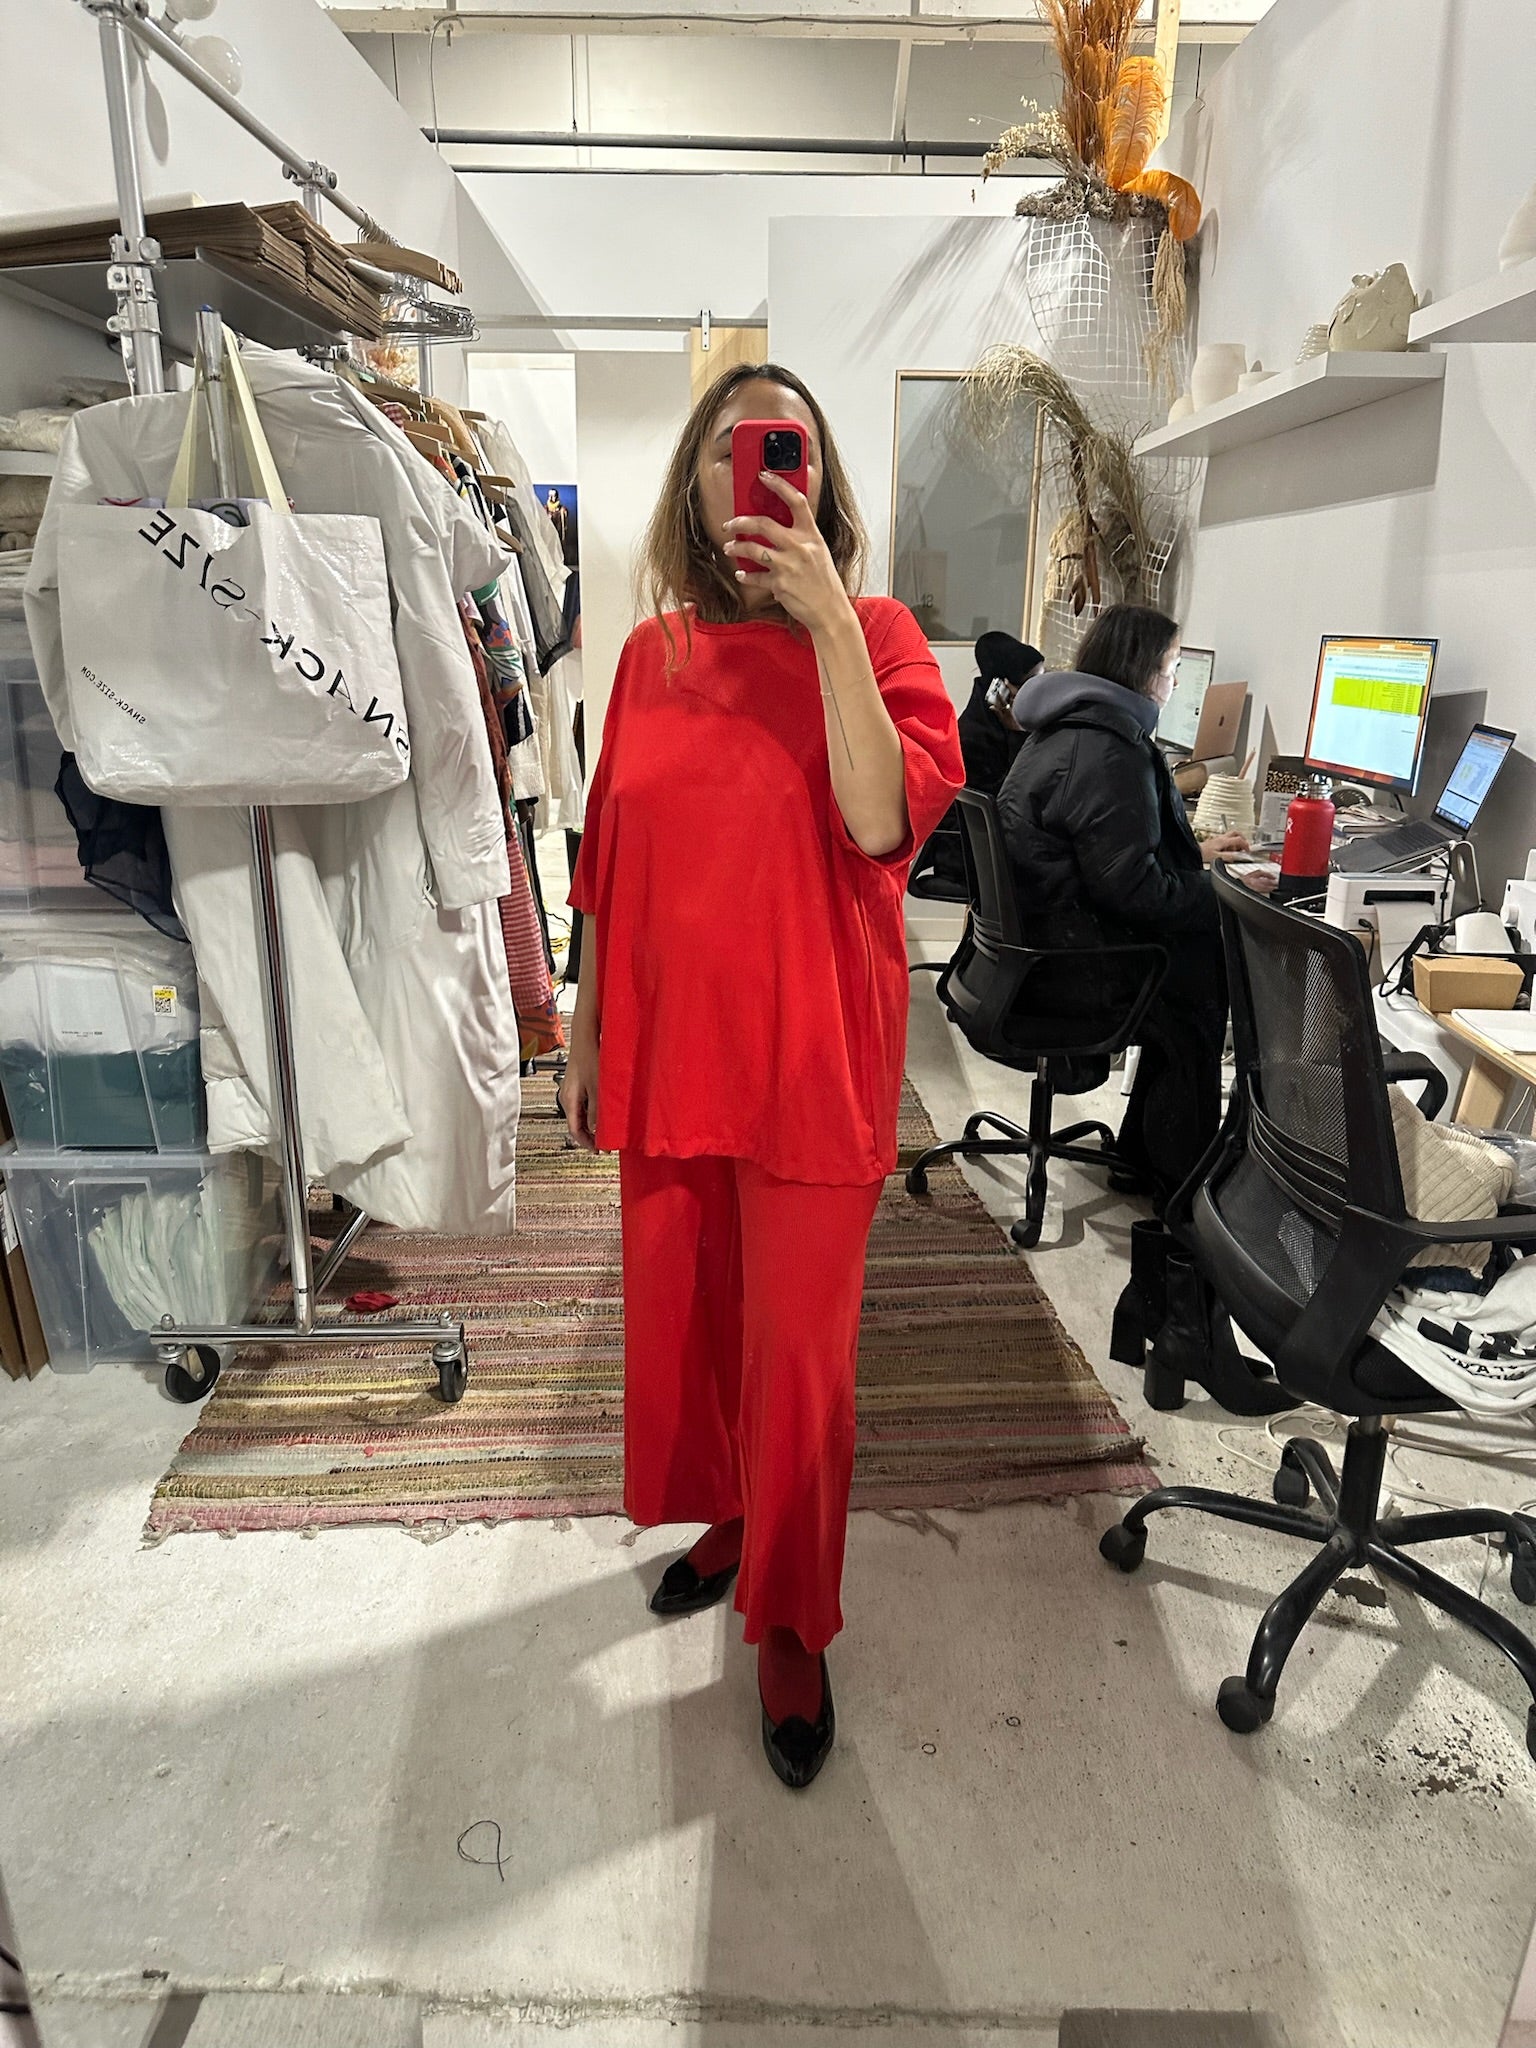 Liza Pant in Red